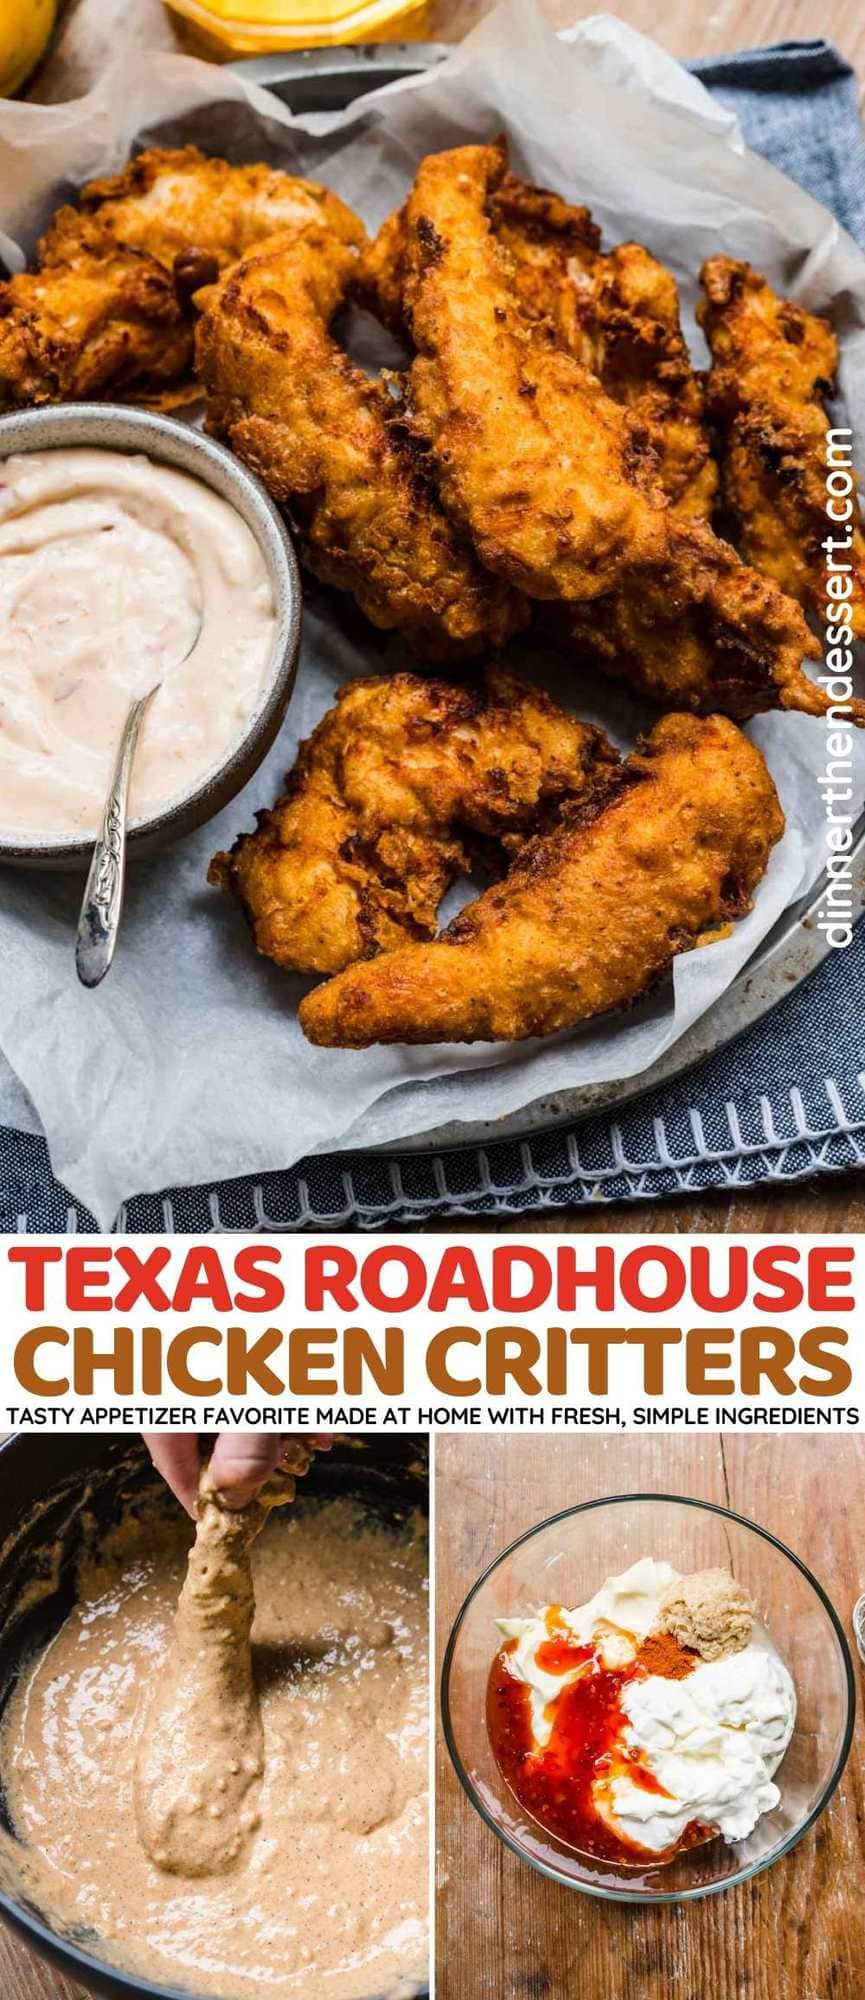 Texas Roadhouse Chicken Critters collage